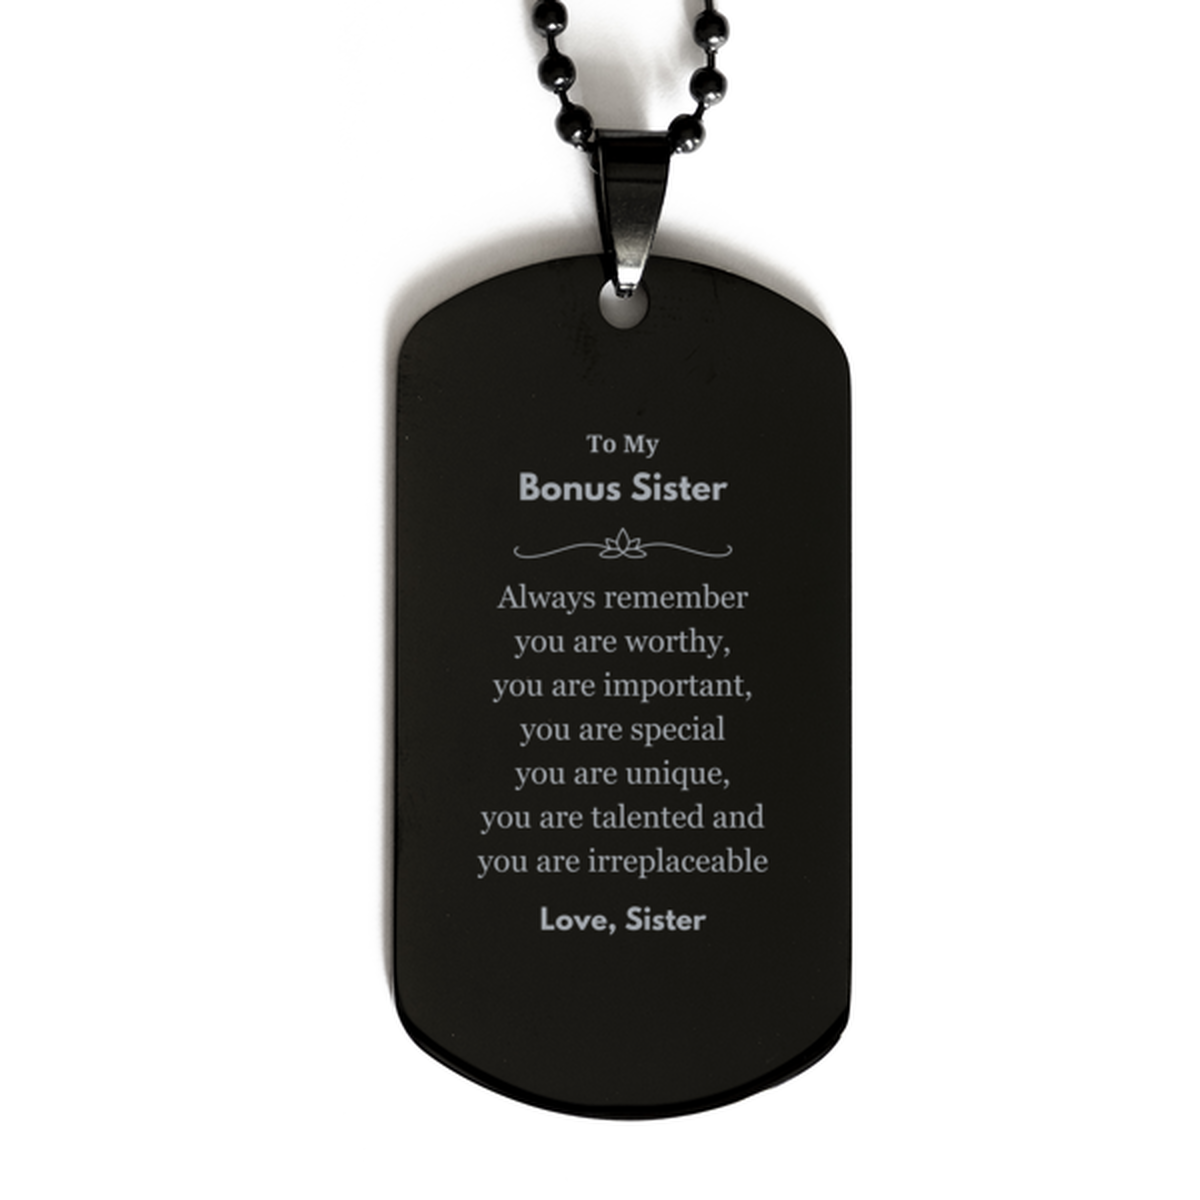 Bonus Sister Birthday Gifts from Sister, Inspirational Black Dog Tag for Bonus Sister Christmas Graduation Gifts for Bonus Sister Always remember you are worthy, you are important. Love, Sister